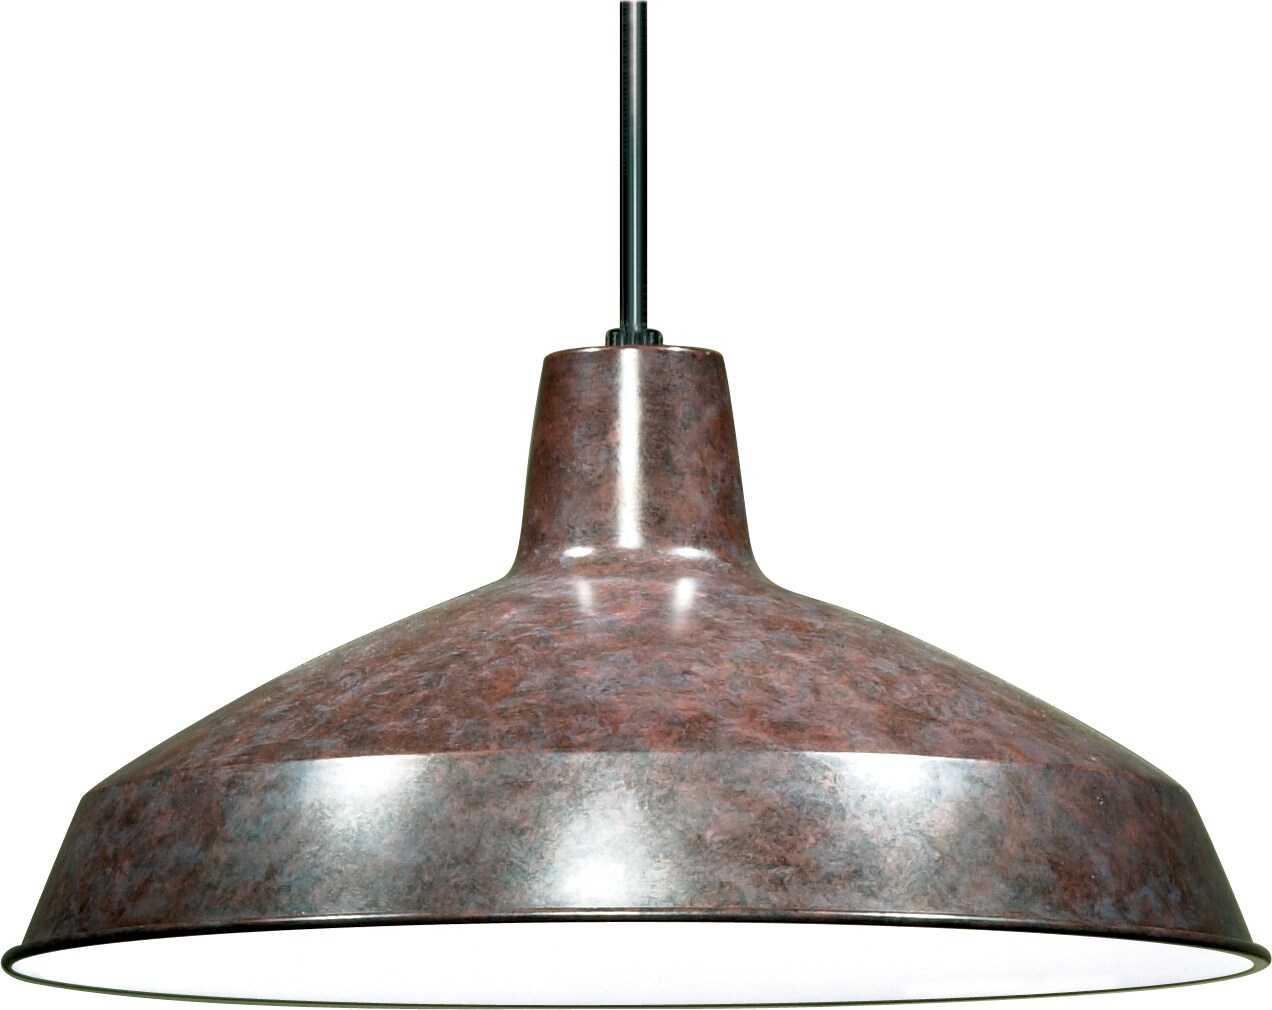 1-Light Hanging Mounted Outdoor Light Fixture in Old Bronze Finish